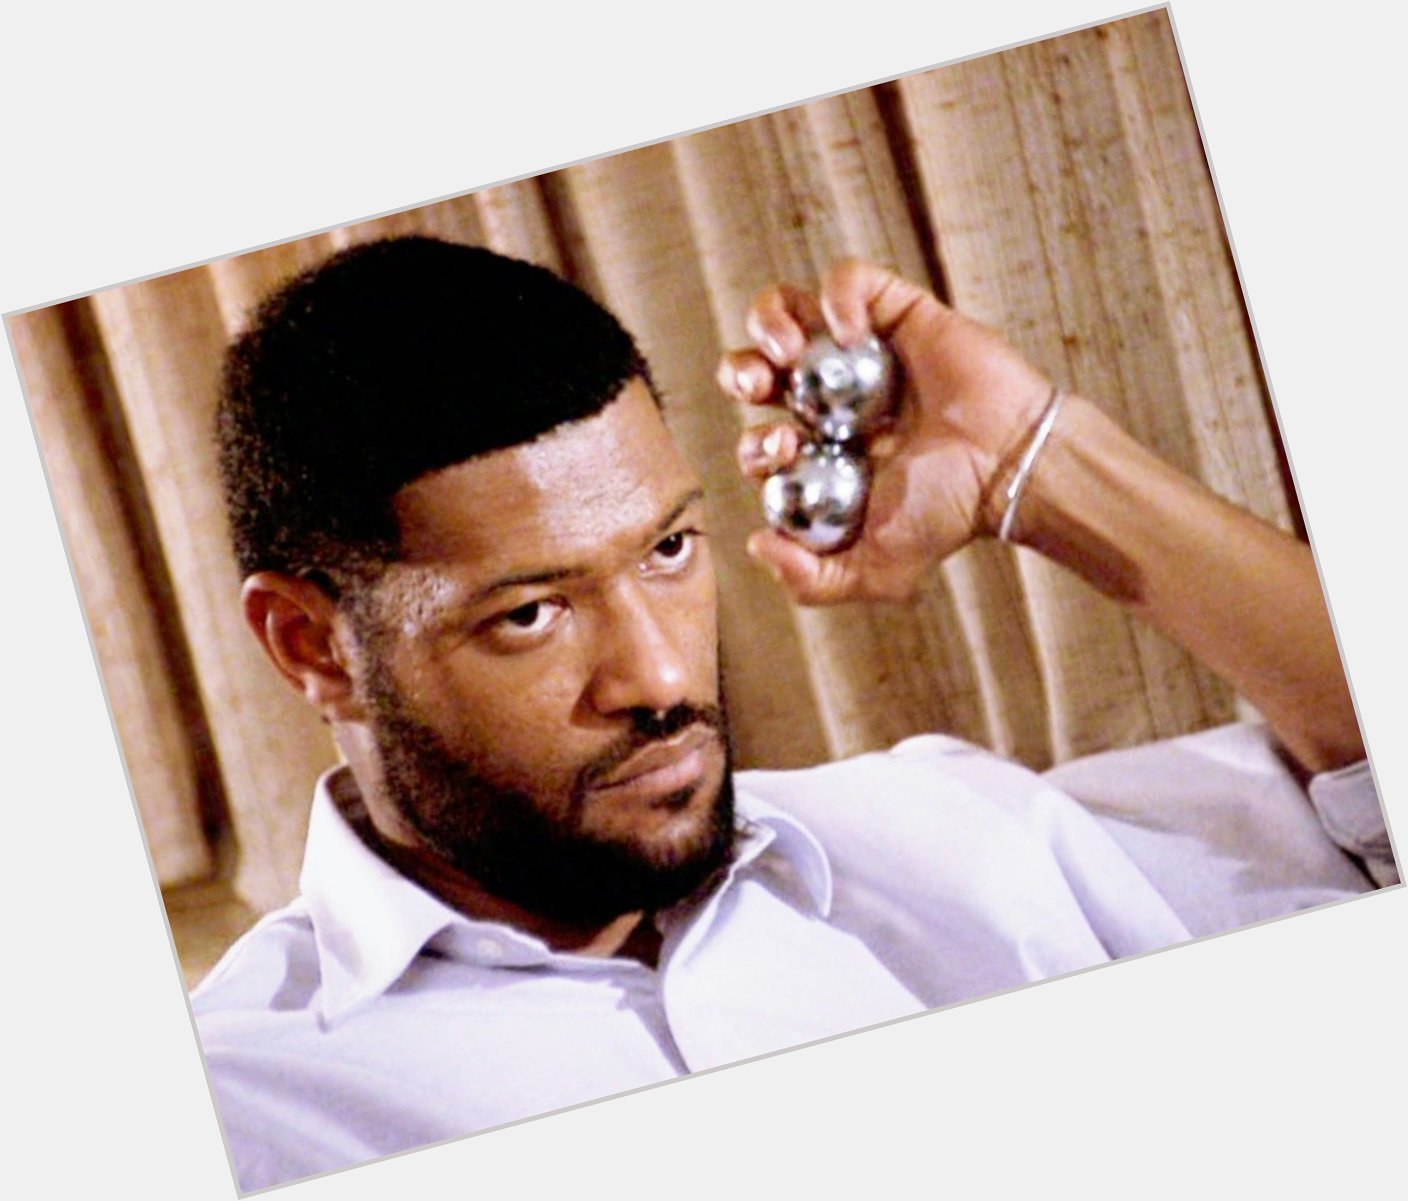 Happy Birthday to Laurence Fishburne who turns 60 today! 